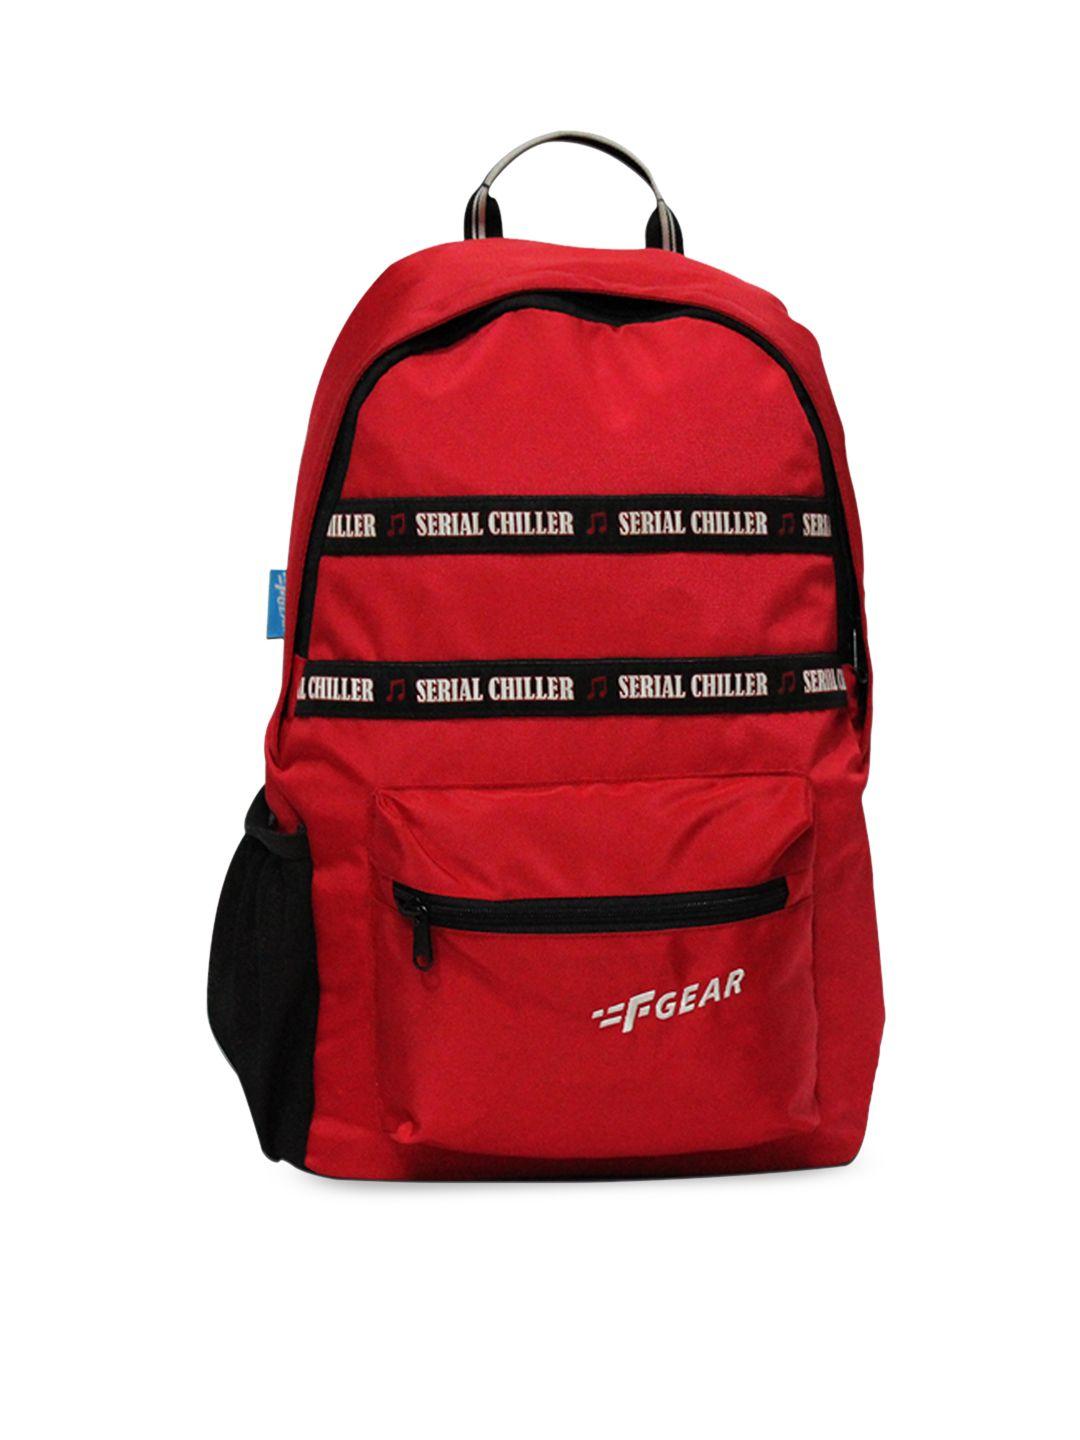 f gear unisex red & black contrast detail backpack